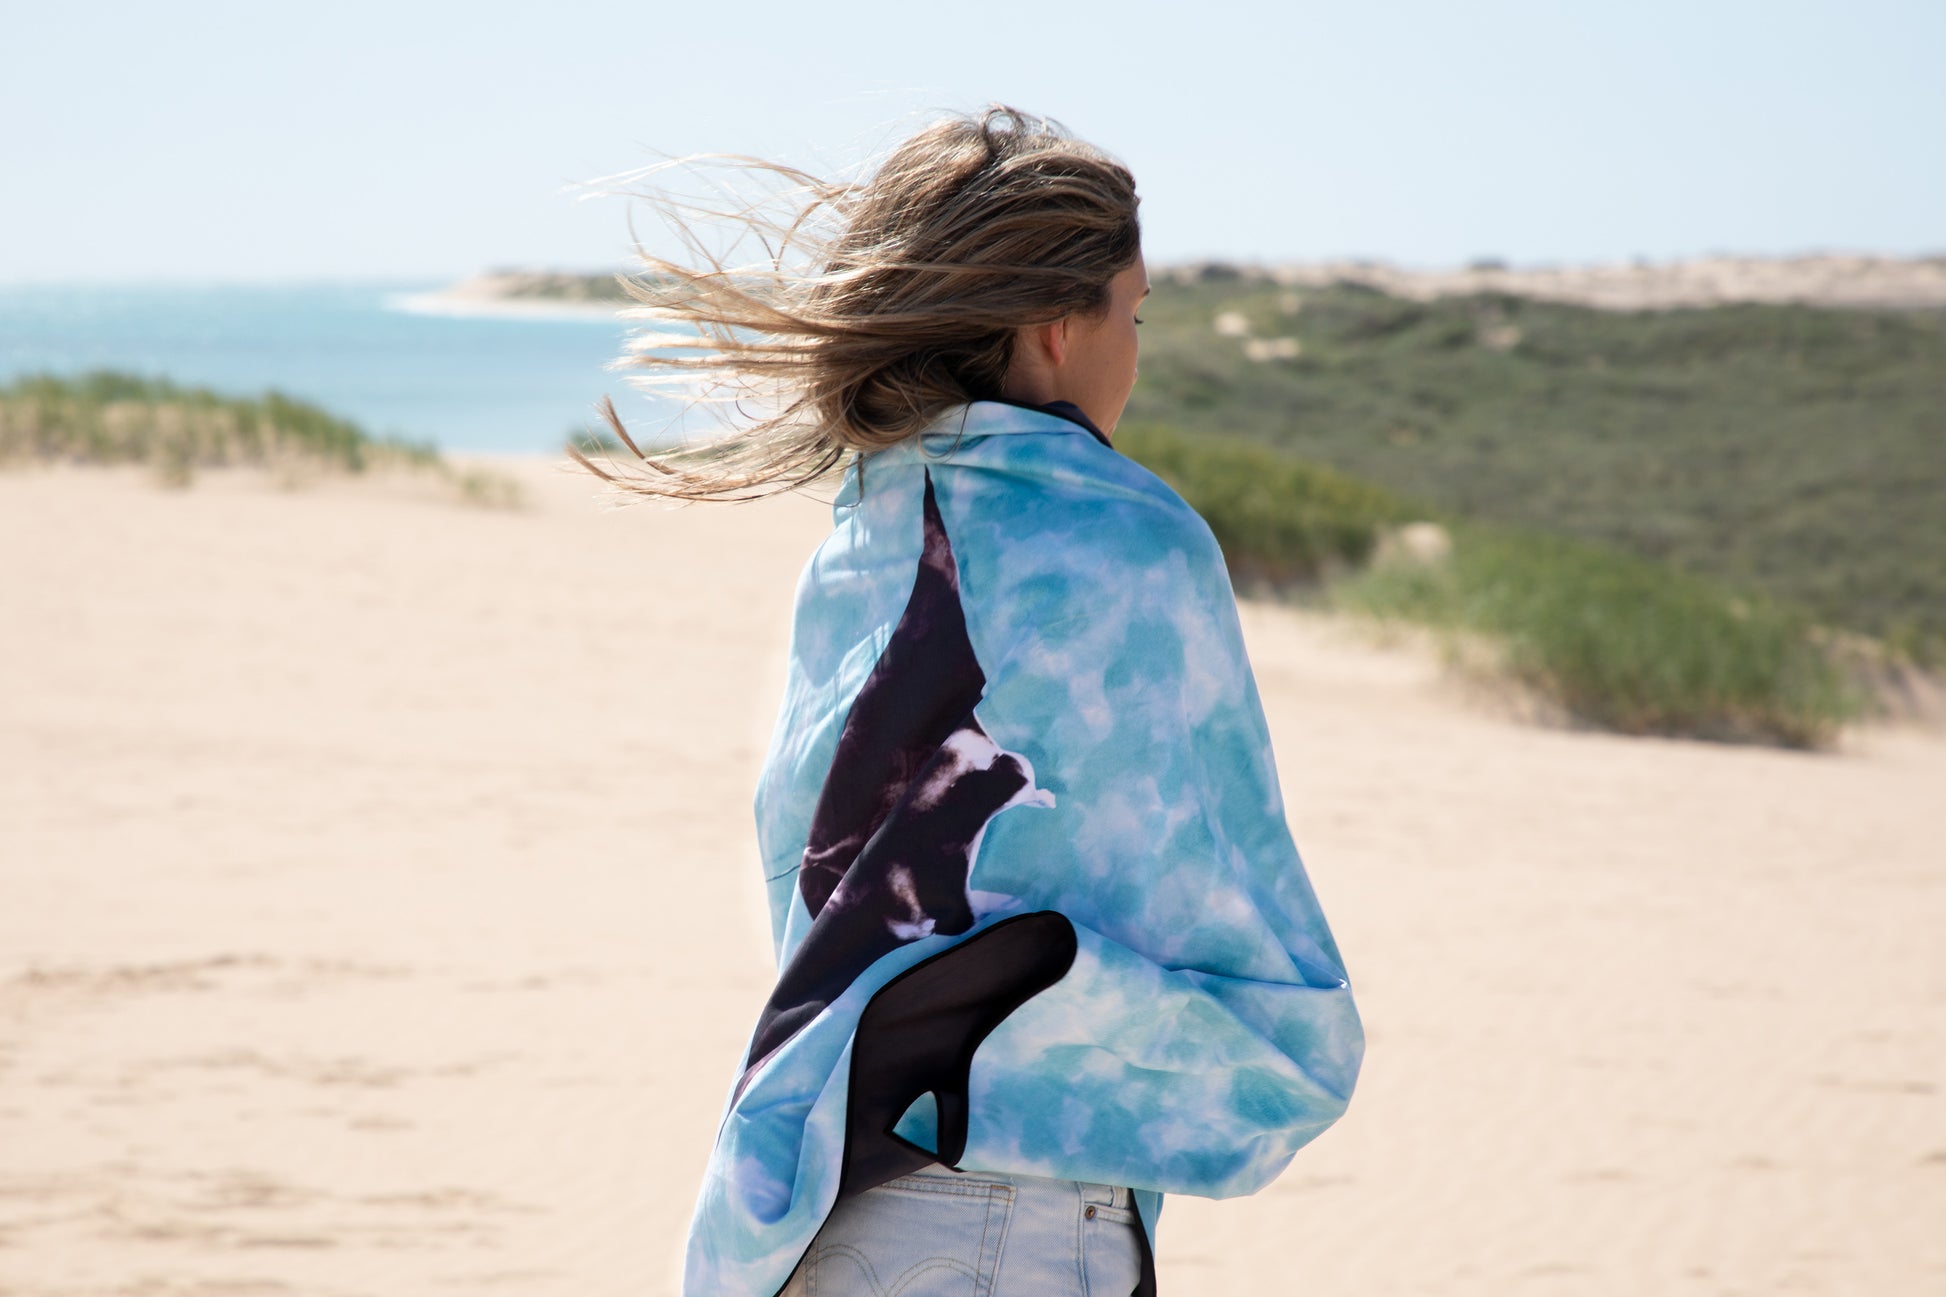 Manta Ray Travel TowelInspired by the crystal clear blue water on the Ningaloo Reef.We often pop our sunglasses down just to check it's not a filter, only to confirm it is in fact PARADISE. Watch as the Manta Rays gracefully glide through what can only be described as 'glassy seas'Sand Free, Quick Dry Travel Towel For the beach, travelling, camping, exercising and more! Sustainably made using post-consumer plastic in the form of recycled Polyester (rPET)in our signature buttery soft Microfiber Suede$64.99Wi